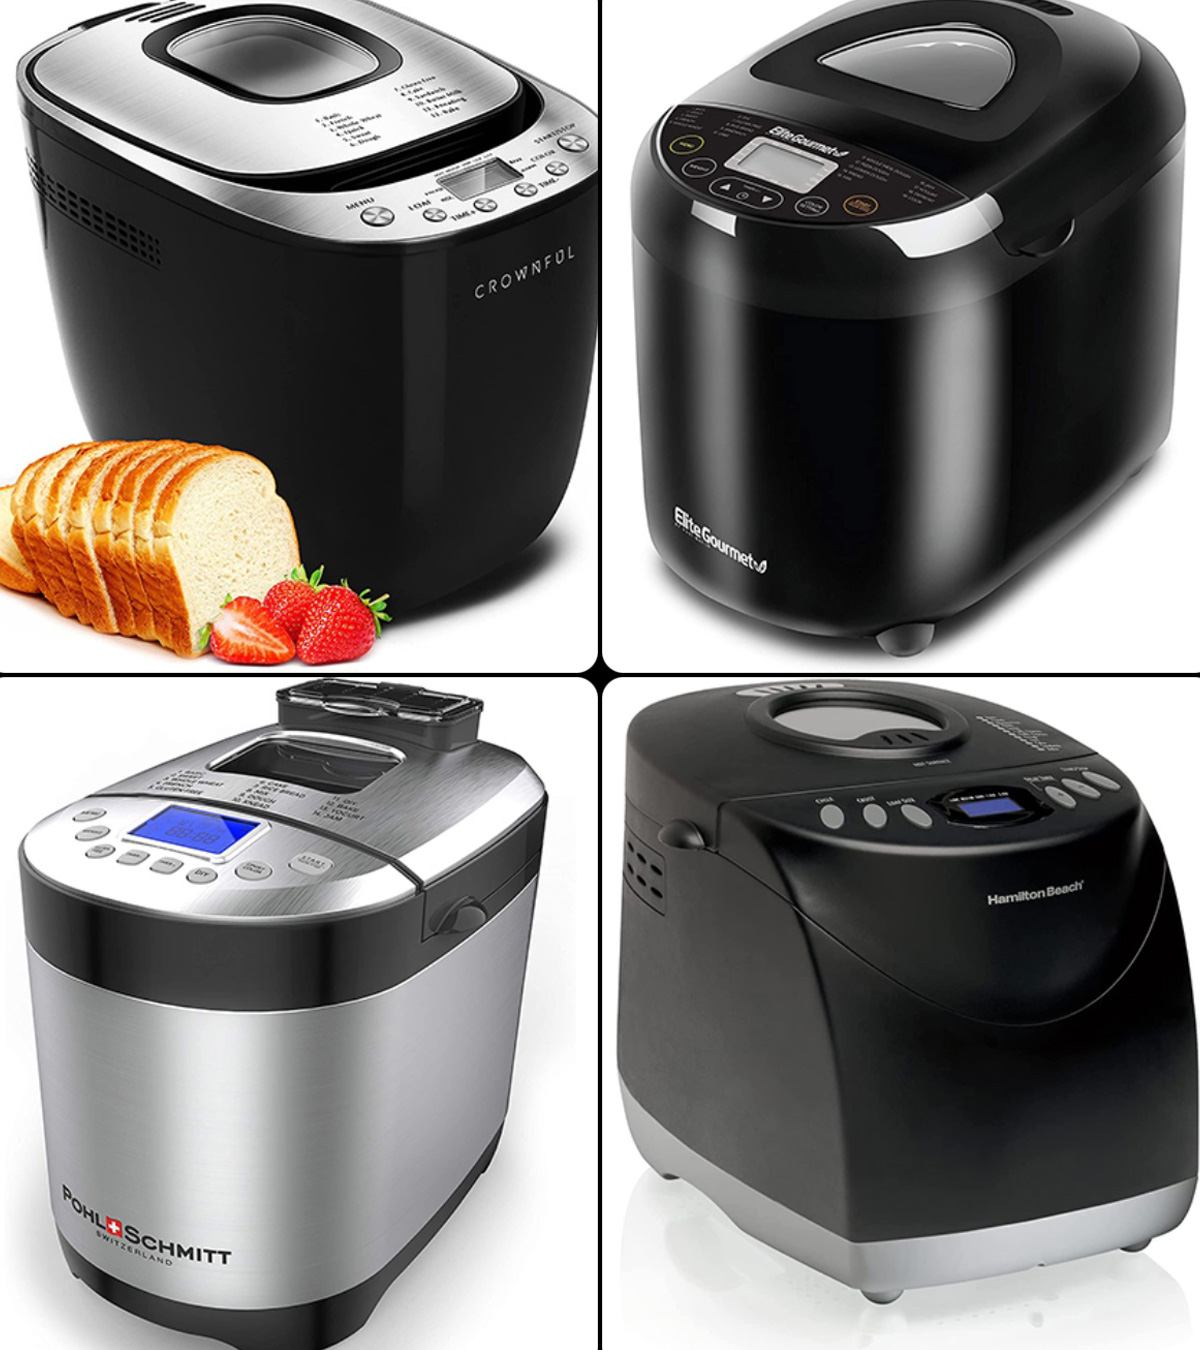 https://www.momjunction.com/wp-content/uploads/2021/07/Best-Bread-Making-Machines-To-Buys.jpg